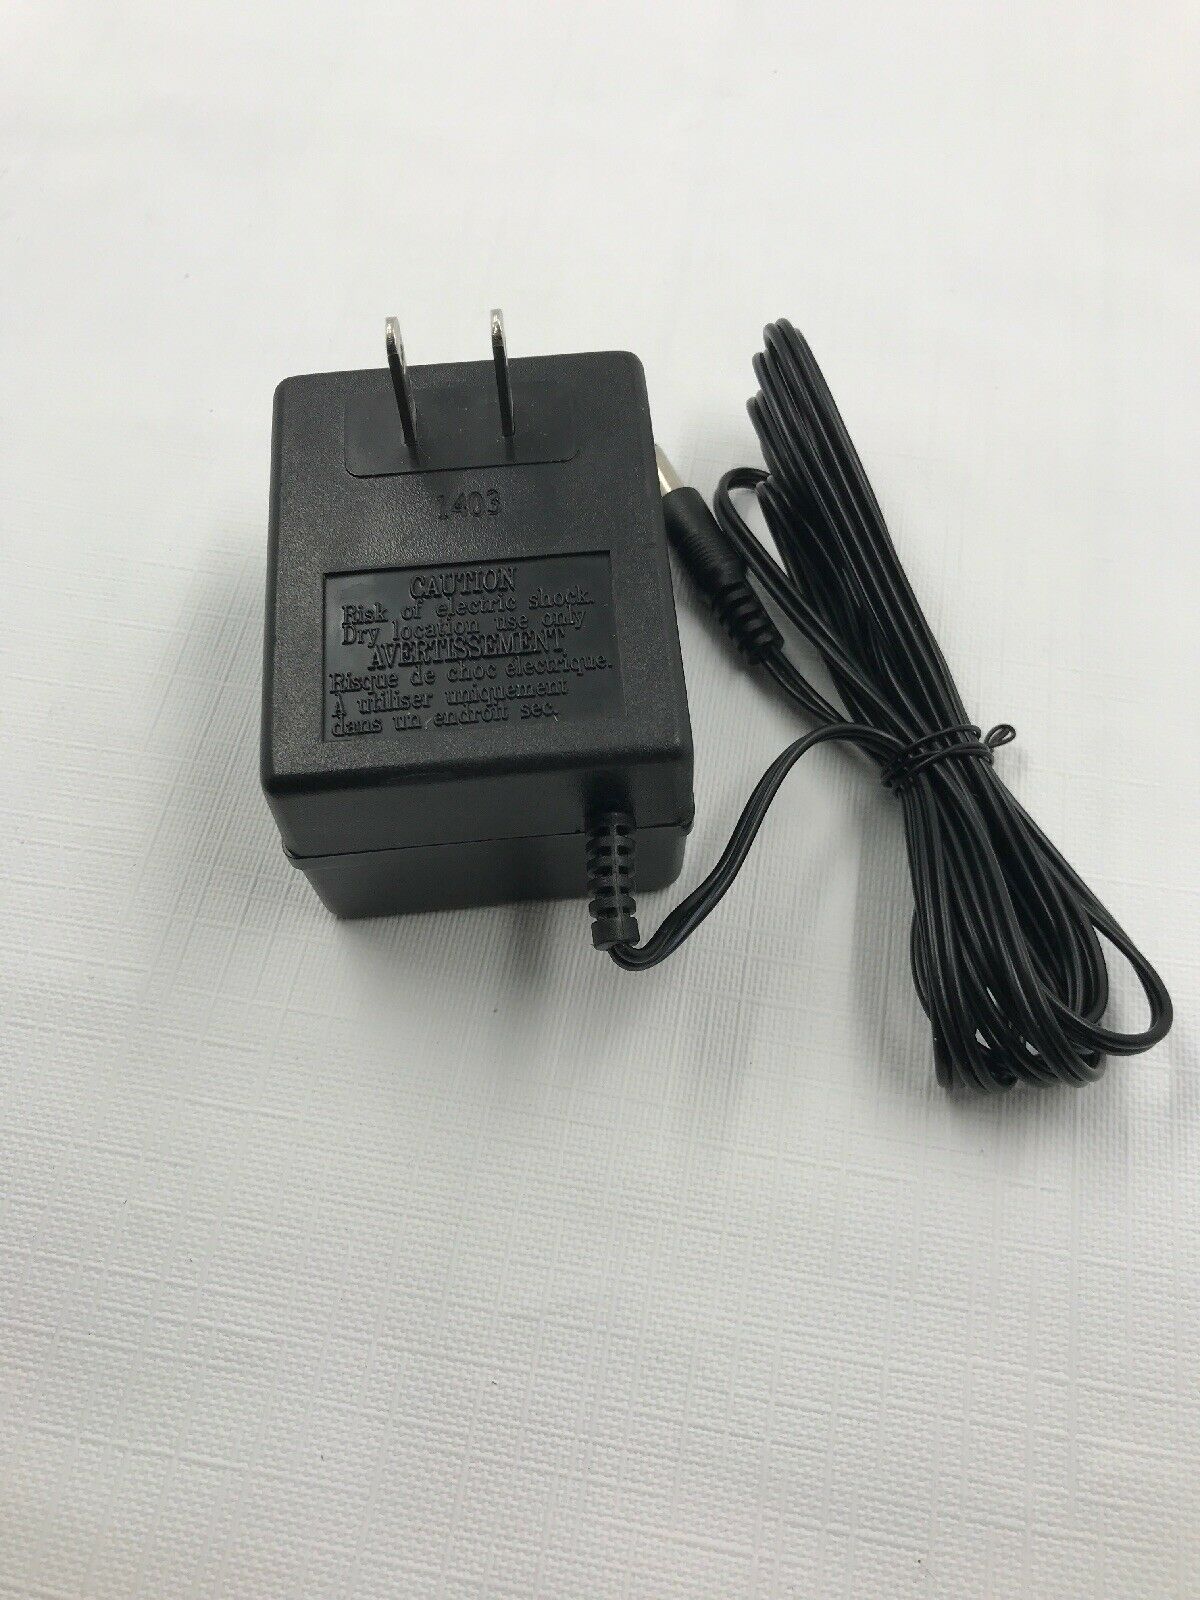 NEW Thomson UD-0608B Power Supply Adapter DC 6V 800mA for Speaker